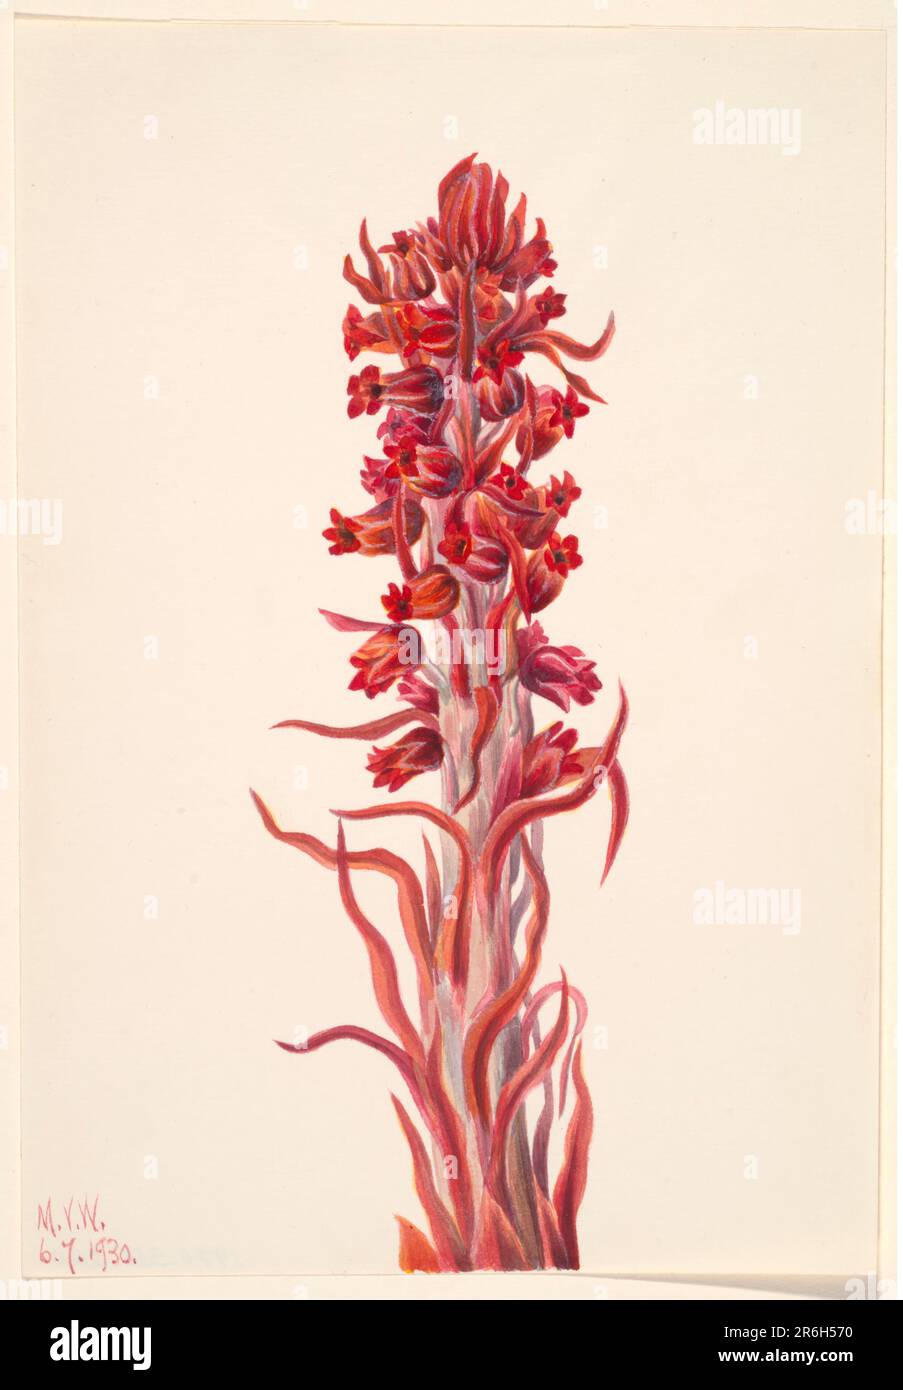 Snow Plant (Sarcodes sanguinea). Watercolor on paper. Date: 1930. Museum: Smithsonian American Art Museum. Stock Photo